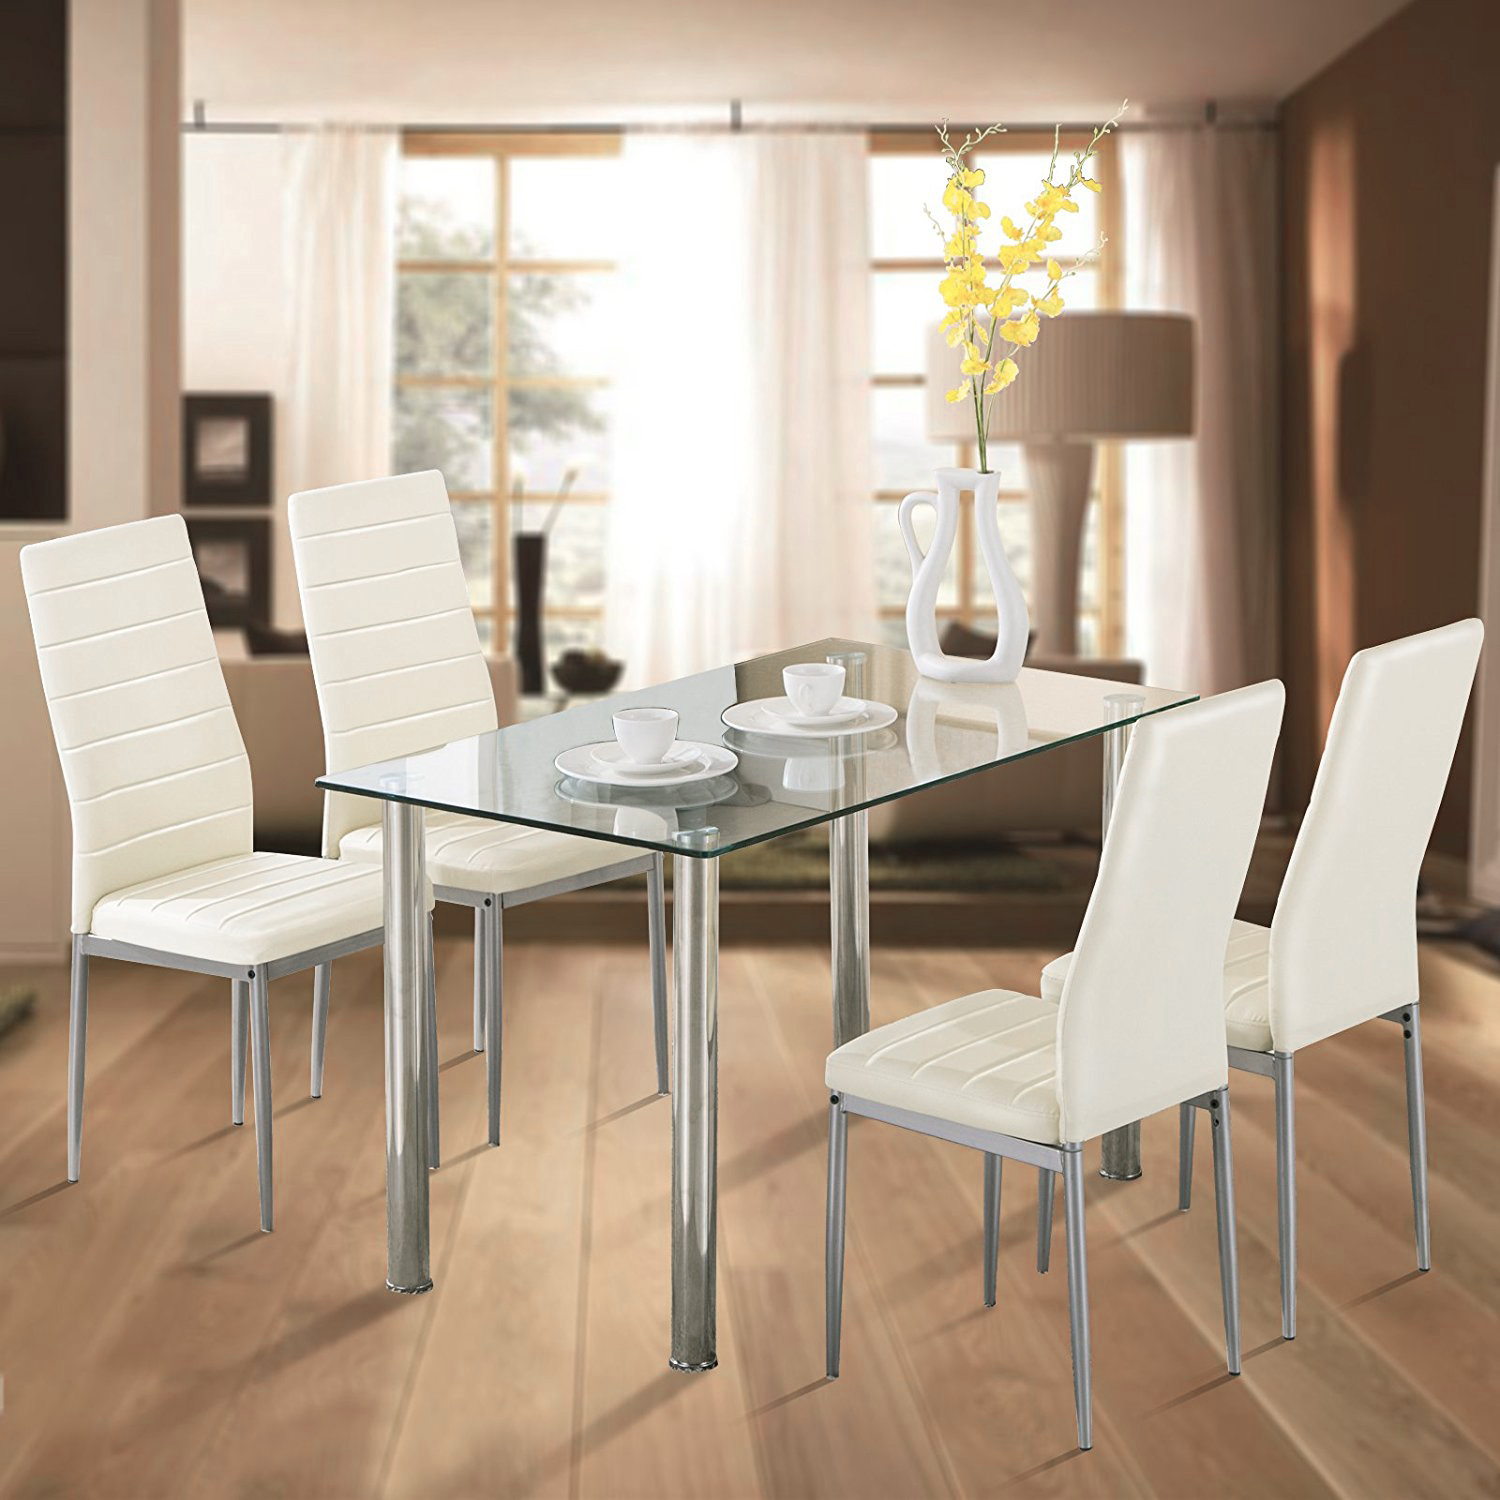 Zimtown 5 Piece Dining Table Set White 4 Chair Glass Metal Kitchen Dining Room Breakfast - image 1 of 9